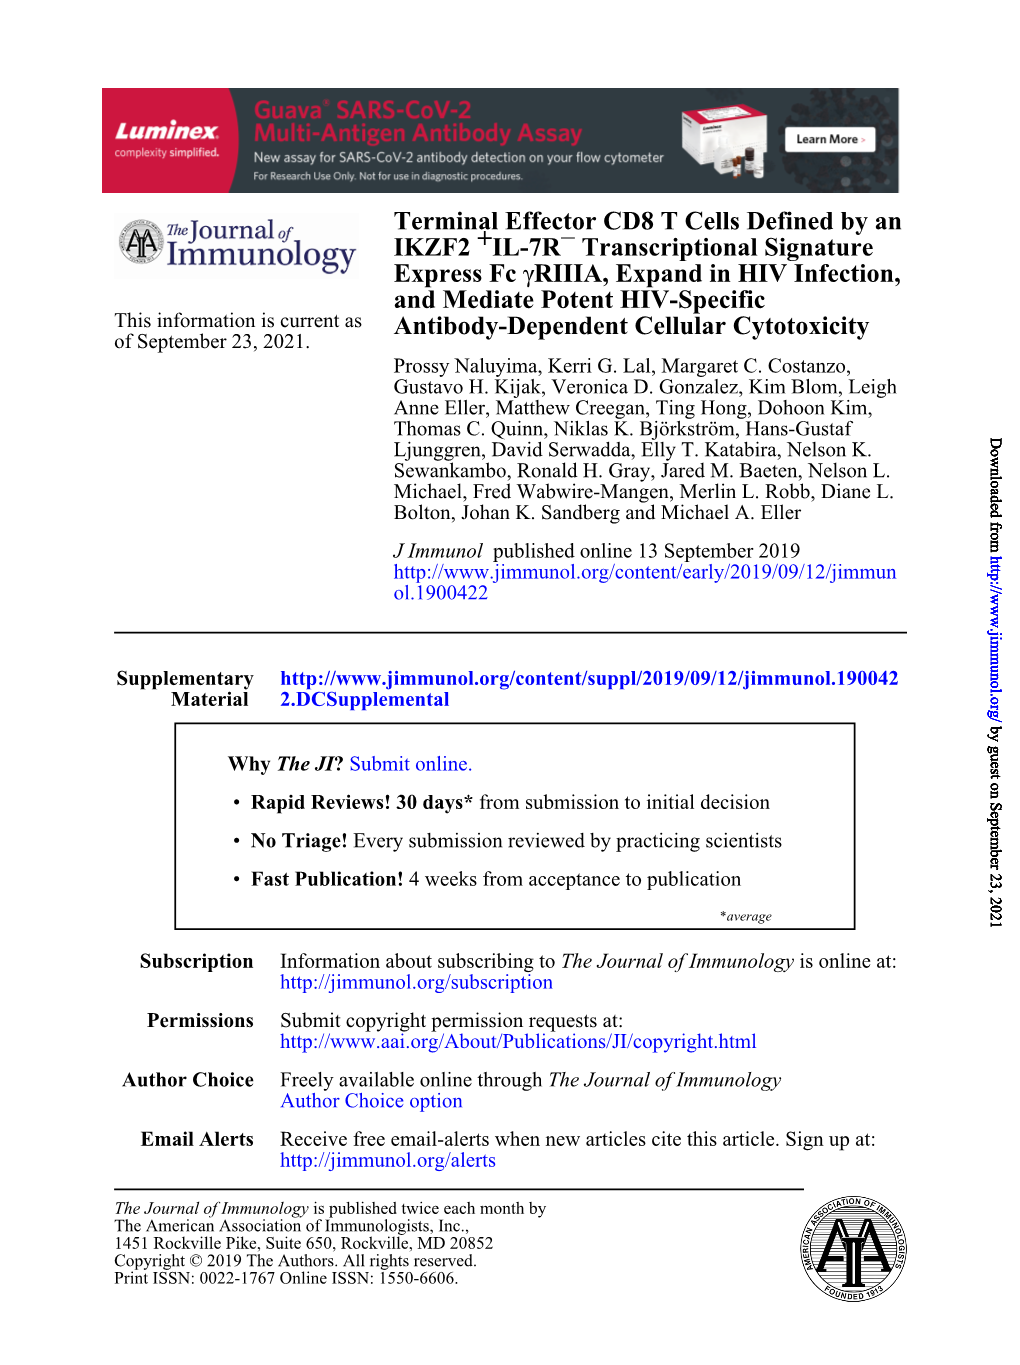 Terminal Effector CD8 T Cells Defined by an IKZF2+IL-7R